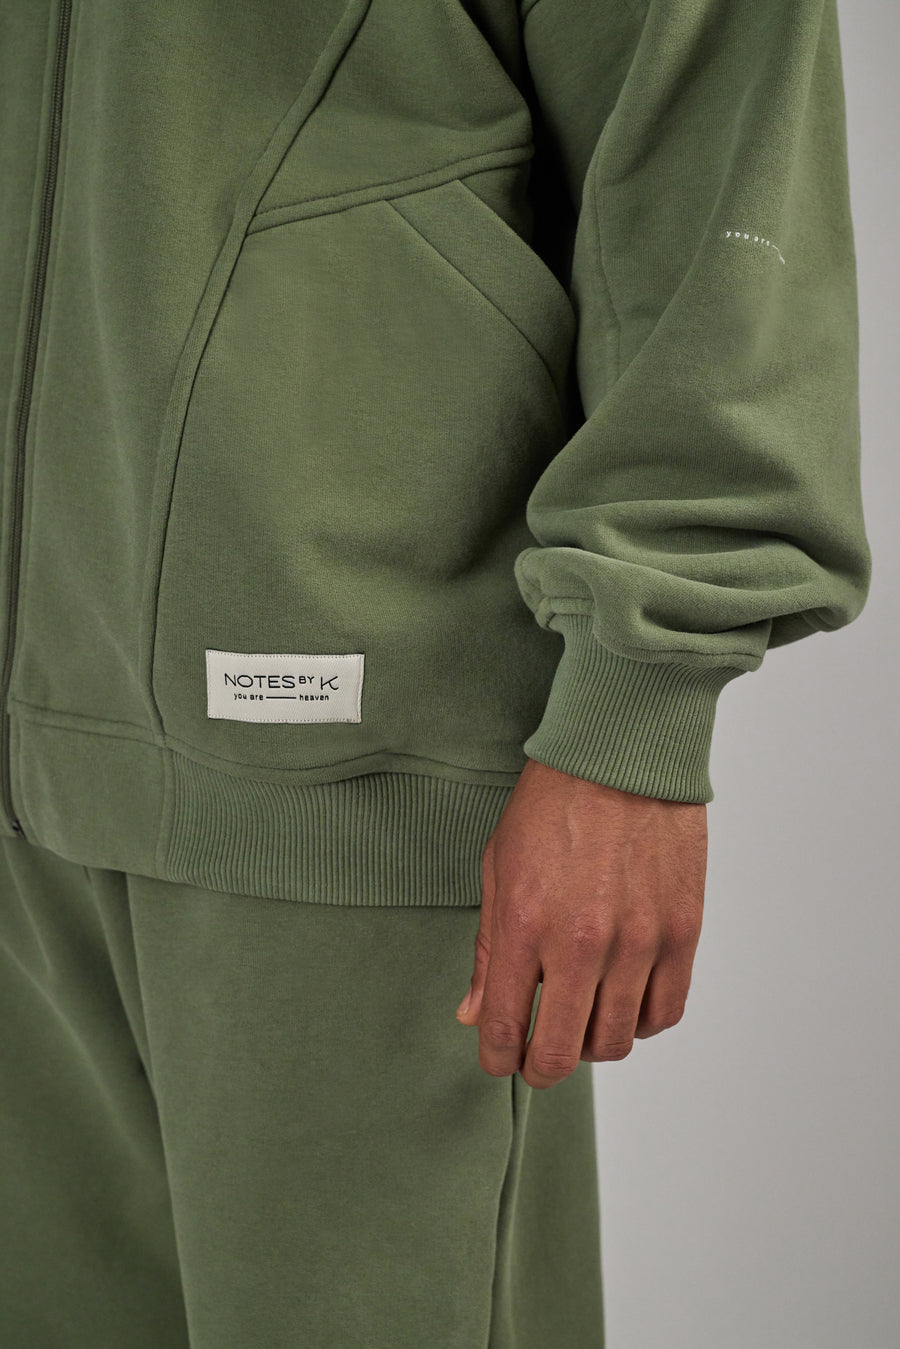 Labeling Detail on an oversized jacket in color sage green